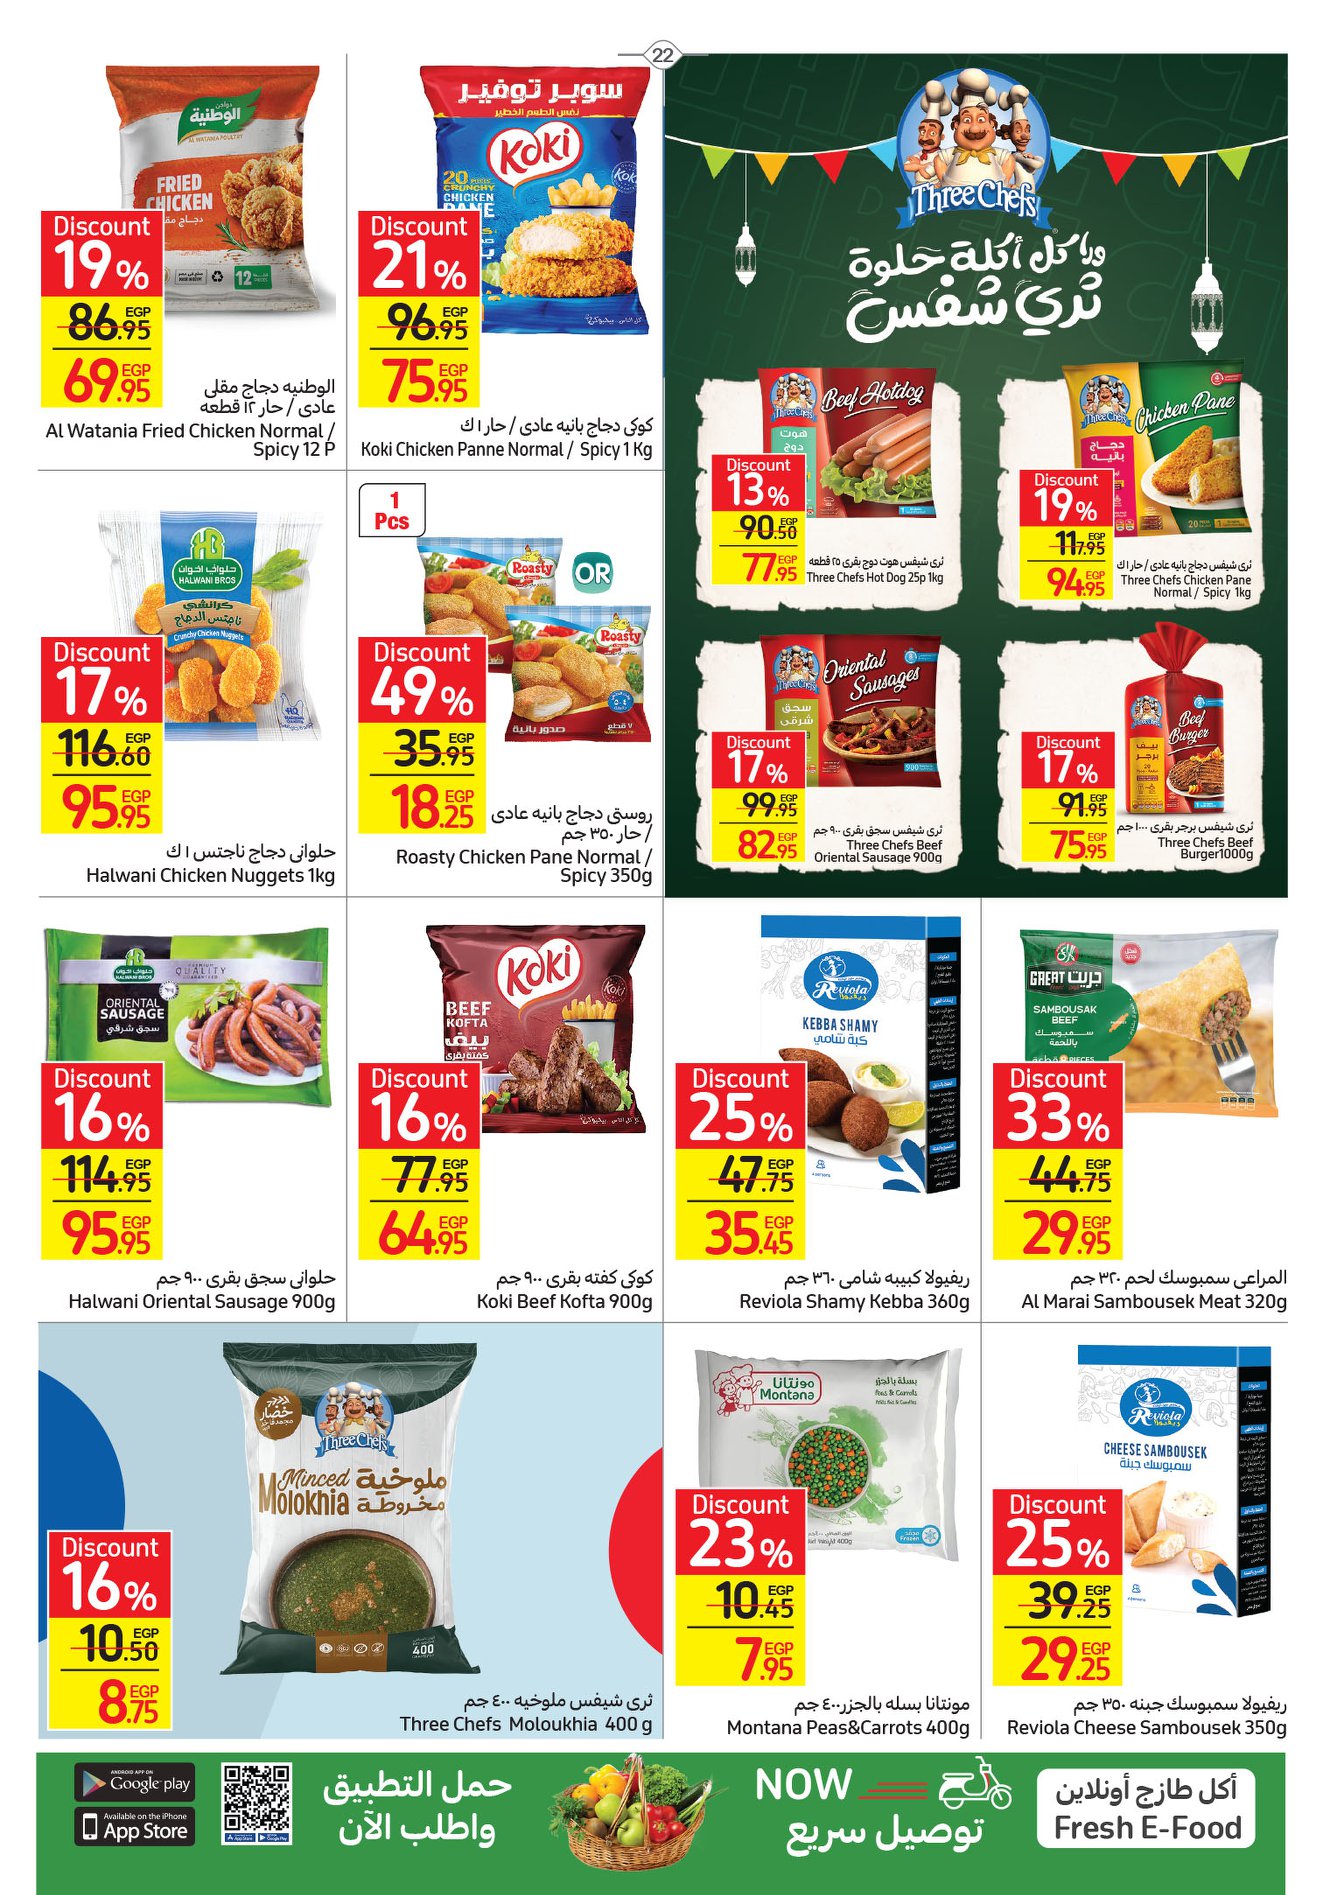 Enjoy now the strongest Carrefour offers from April 17-25, 2022.. Huge discounts on home essentials 3